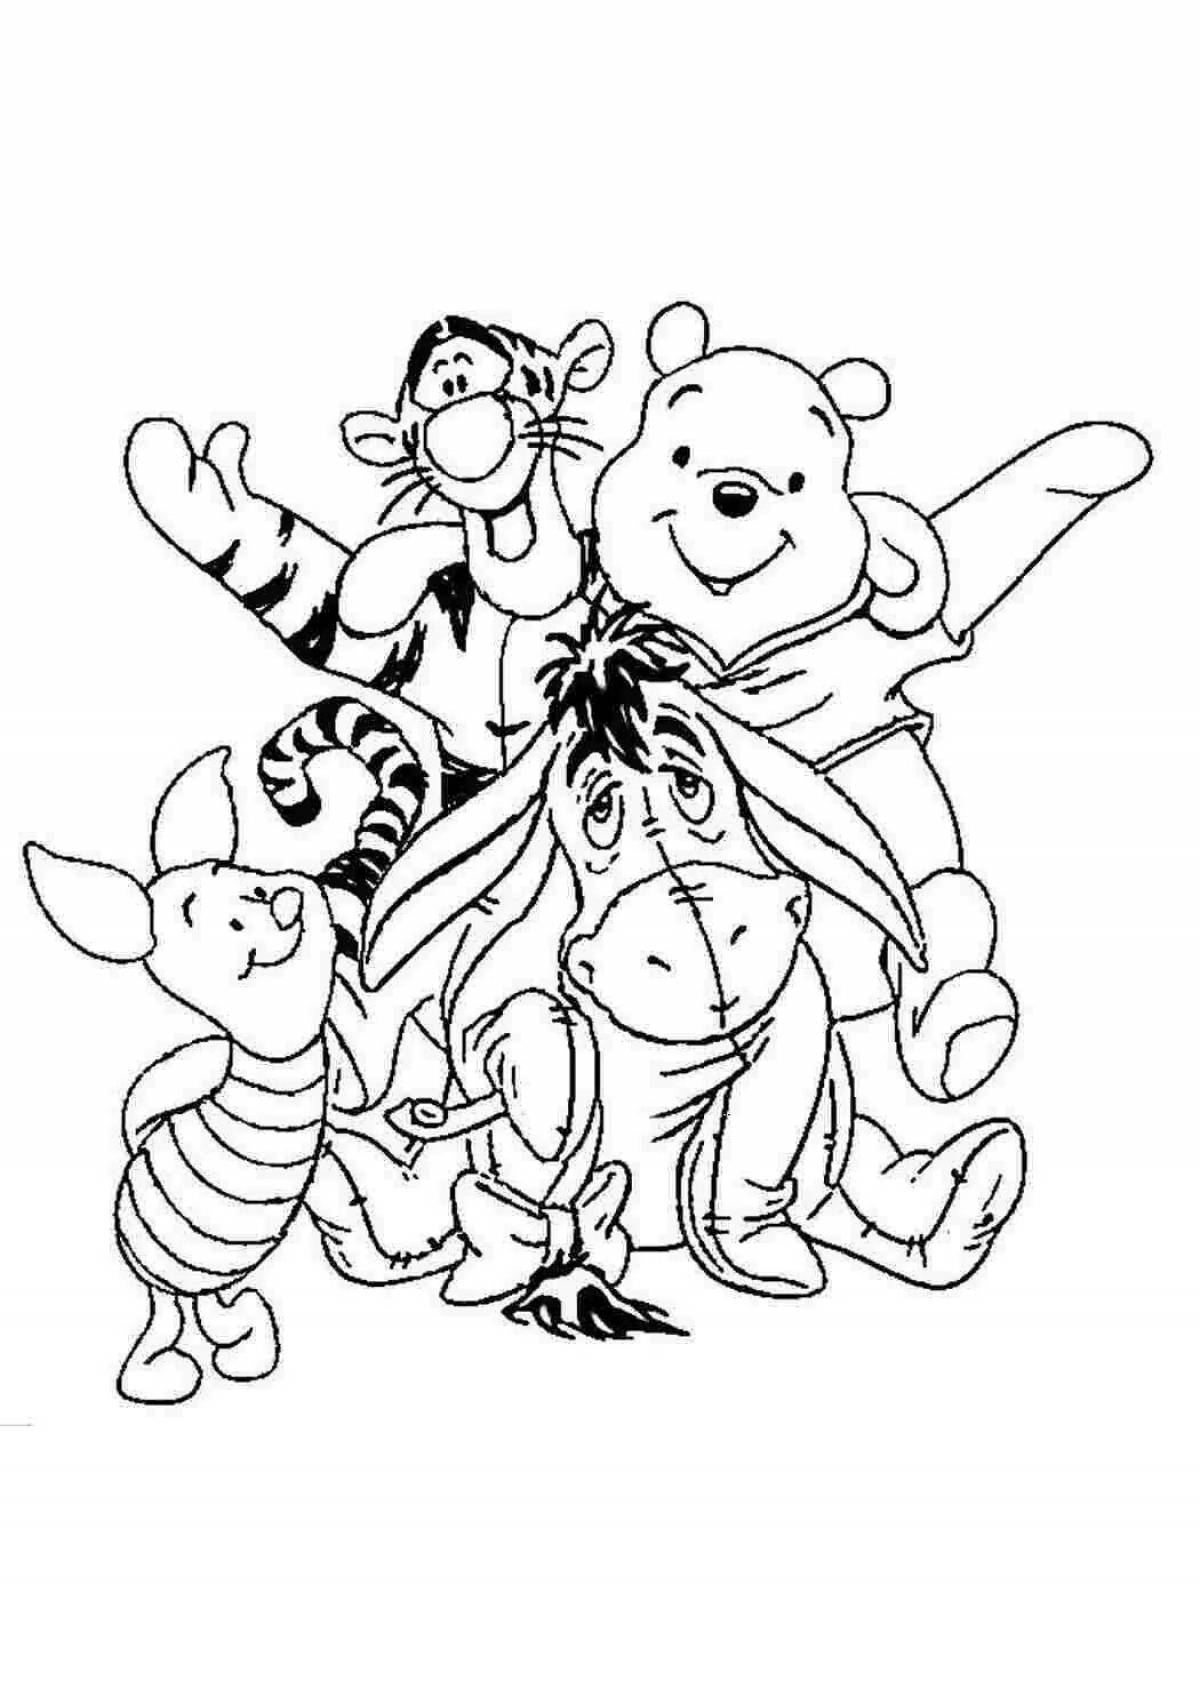 Radiant winnie the pooh and his friends soviet coloring